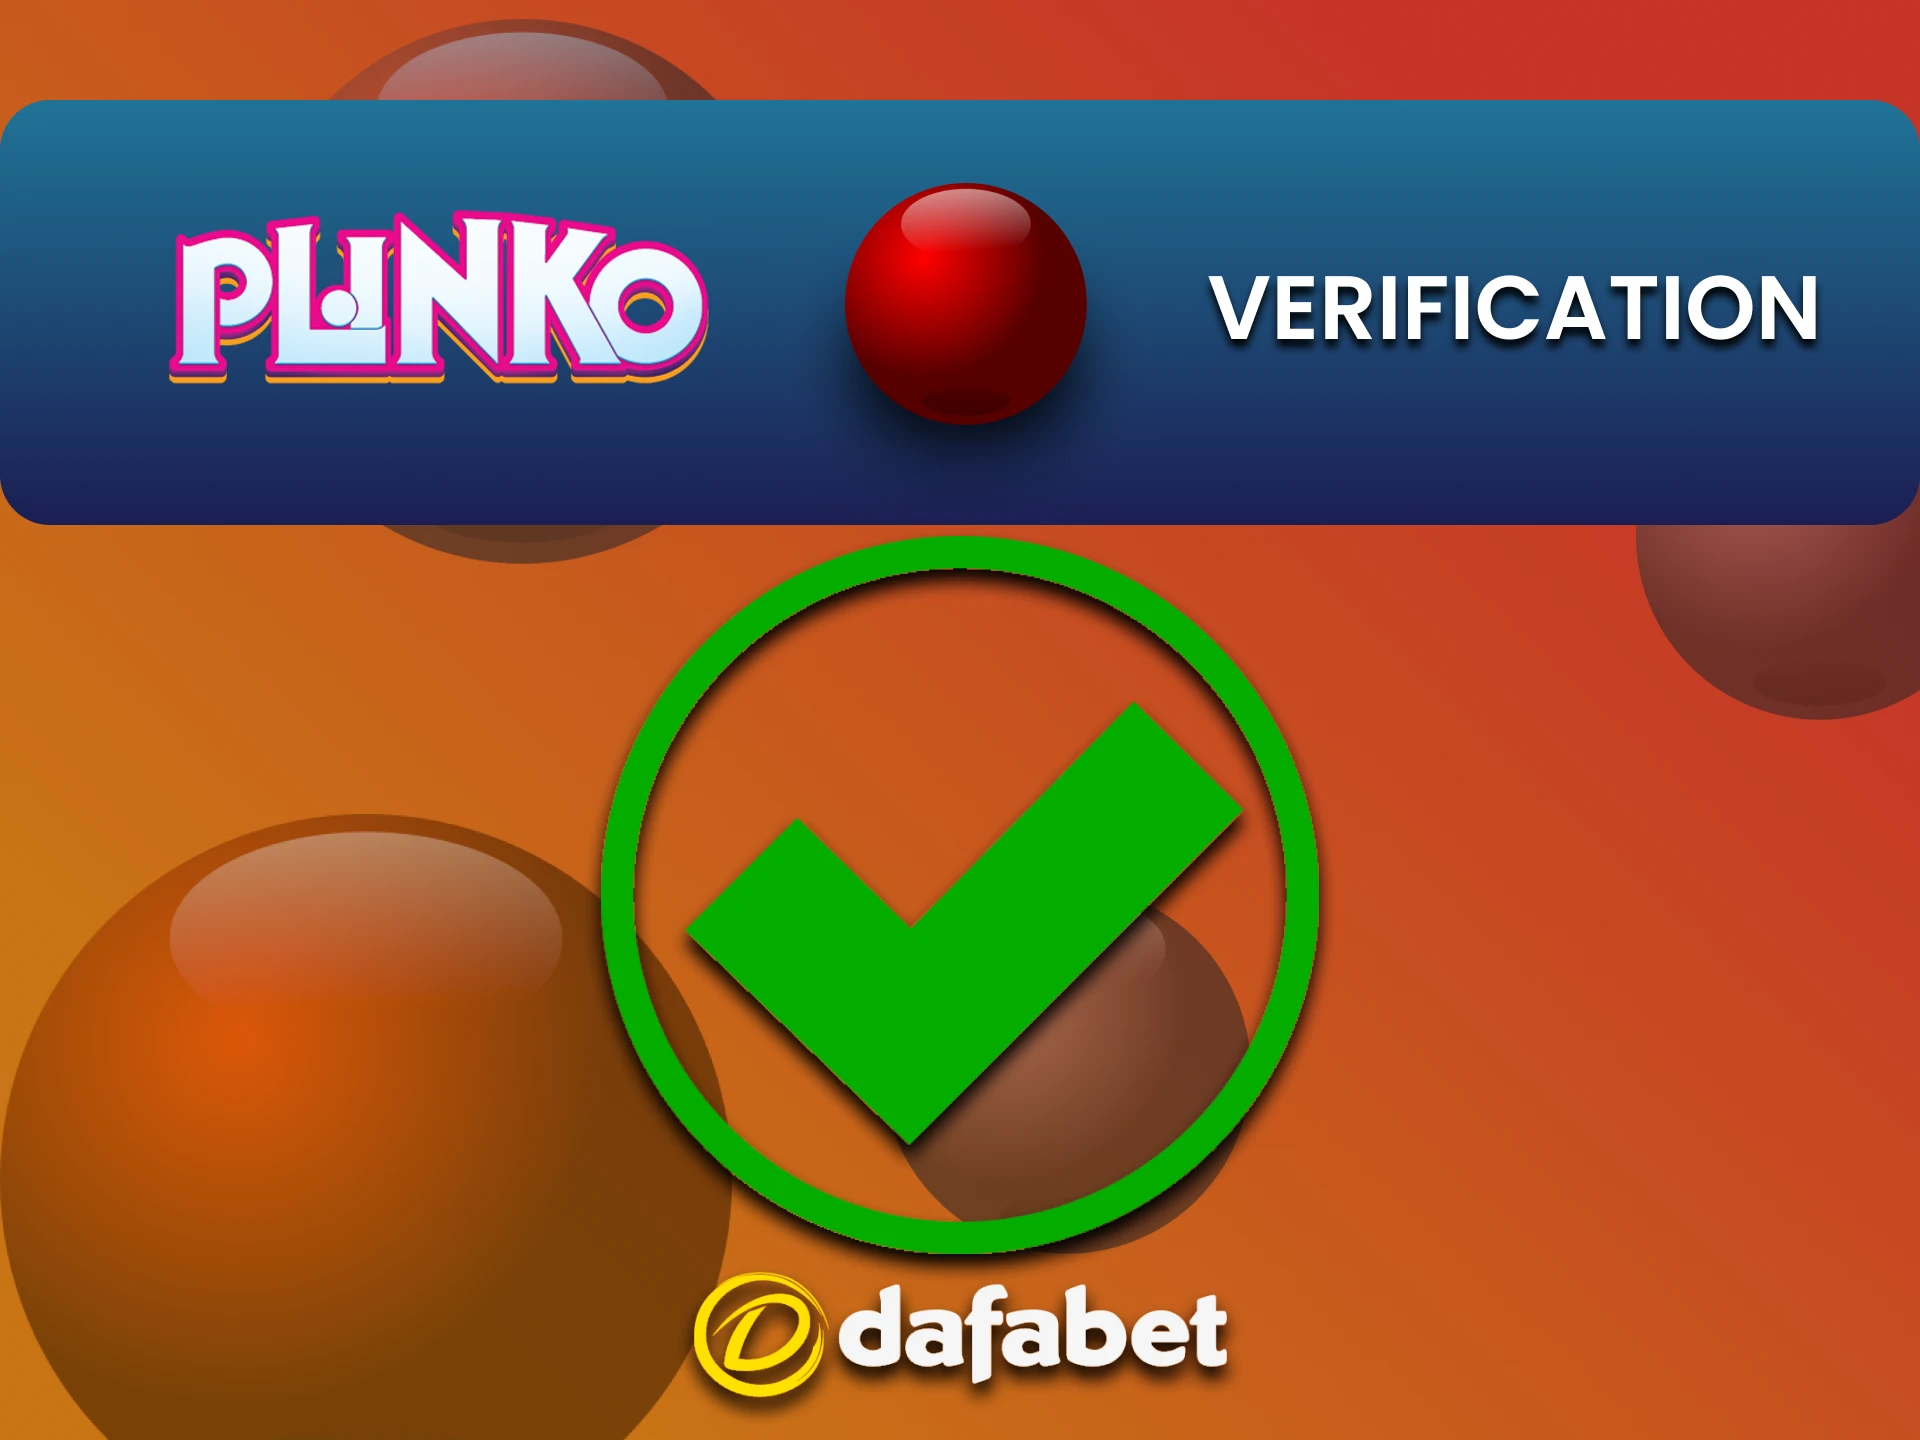 Fill in all the information to play Plinko on Dafabet.